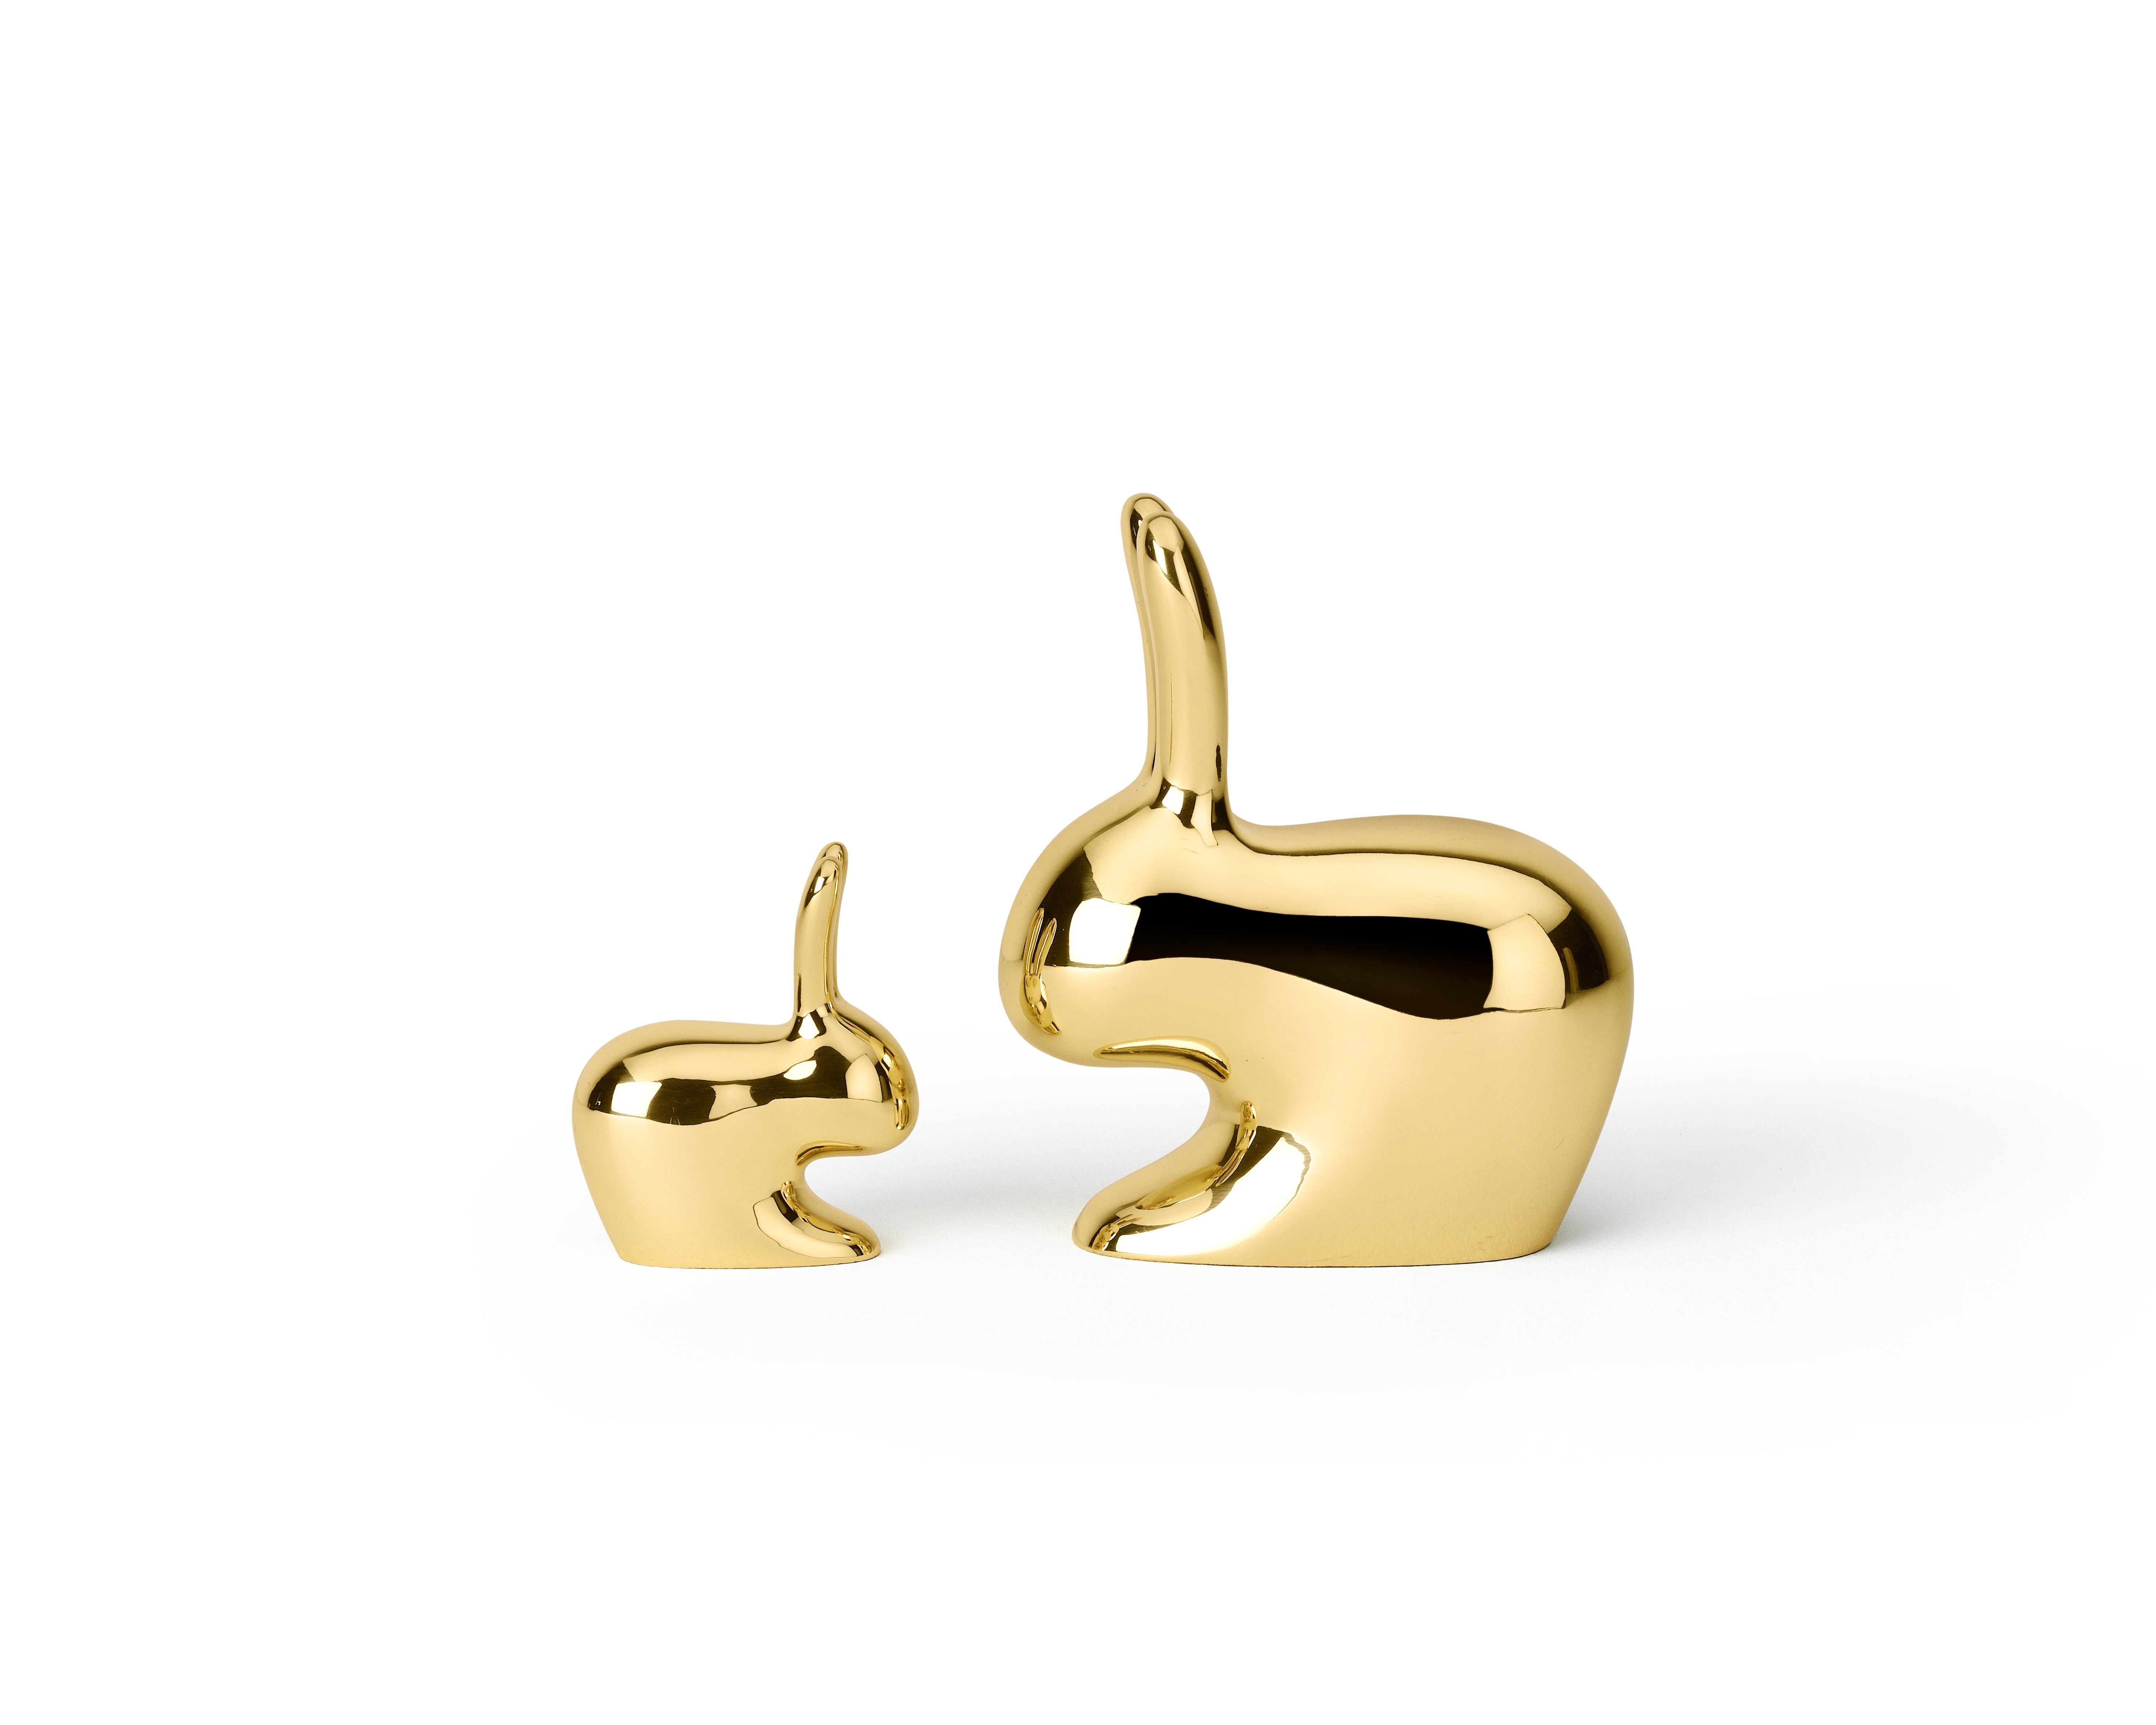 Modern Ghidini 1961 Medium Rabbit in Polished Brass by Stefano Giovannoni For Sale